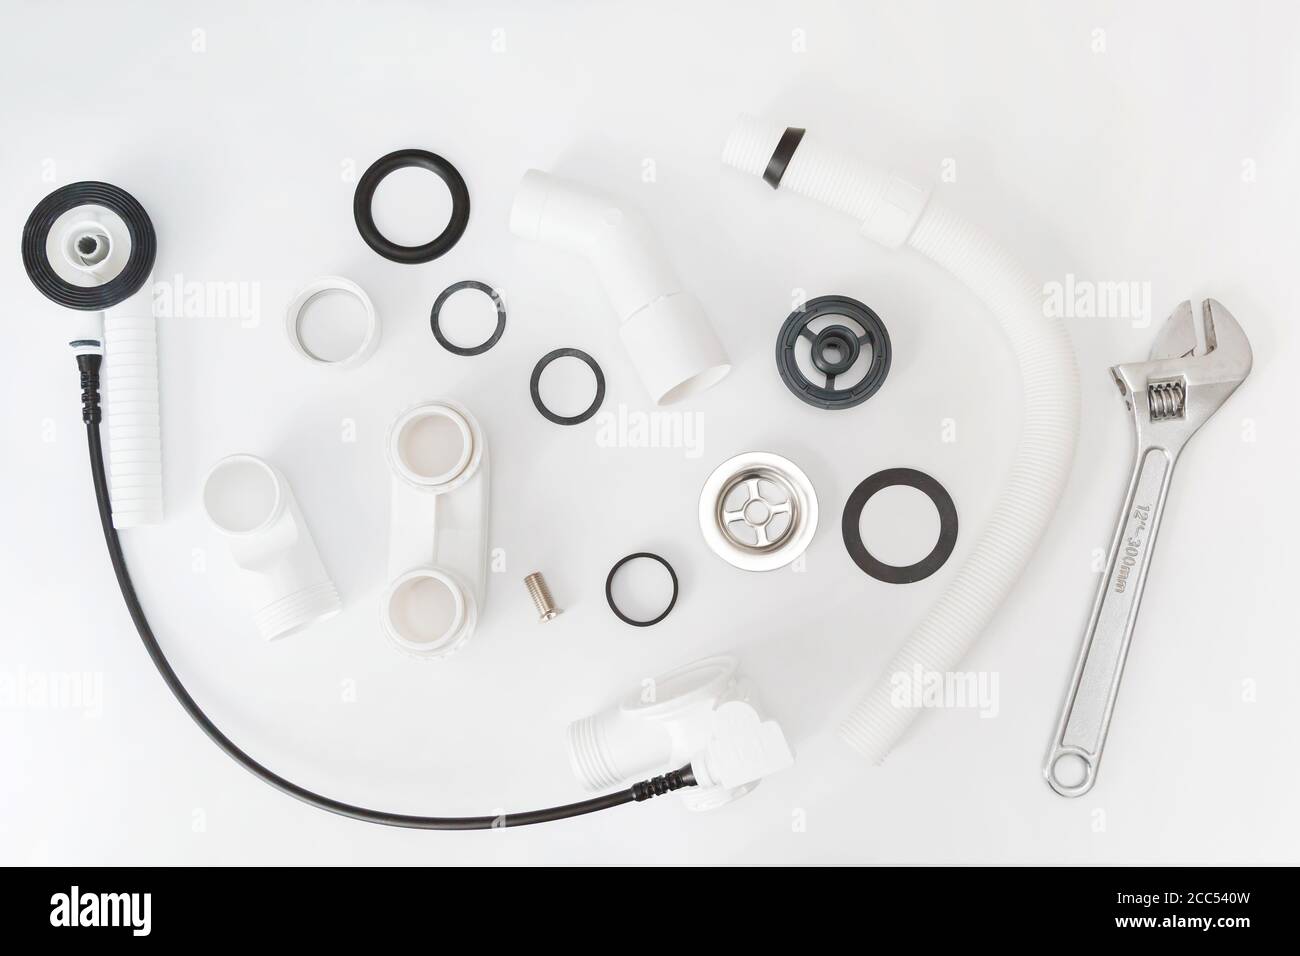 Details plastic siphon kit for bathtub on a white background. Plumbing knolling on white background Stock Photo